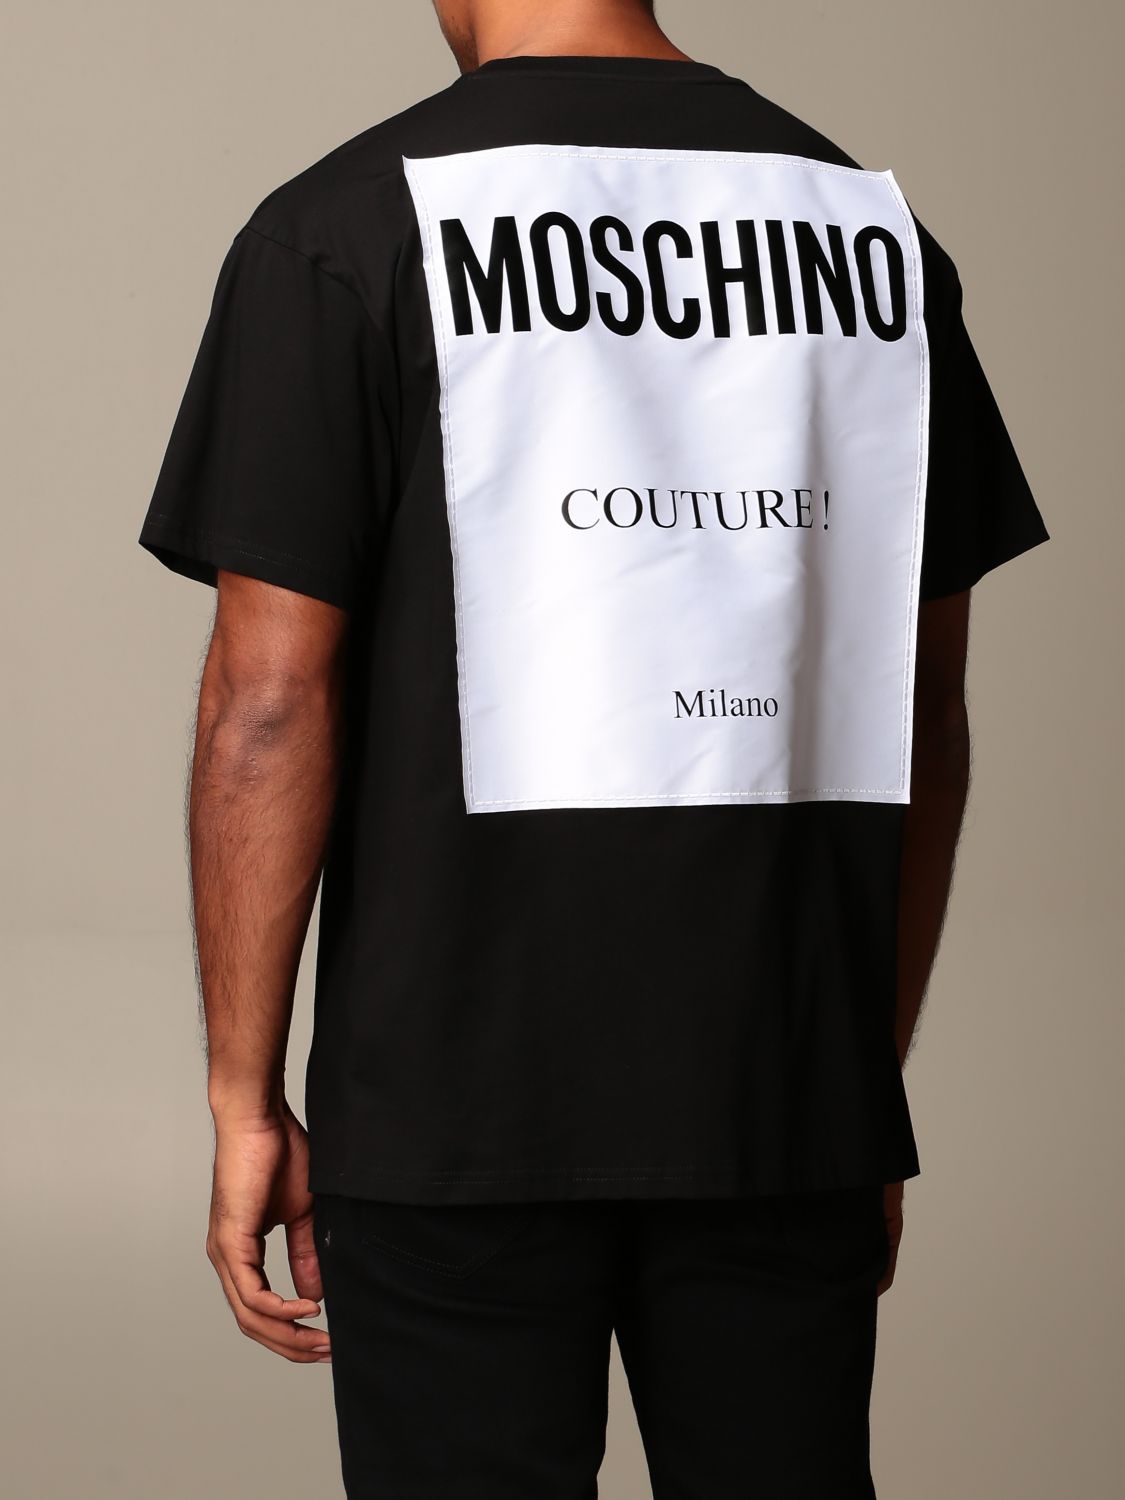 Meander kapok Dew Moschino T Shirts Price Hot Sale, 52% OFF | discoverlifeatl.com